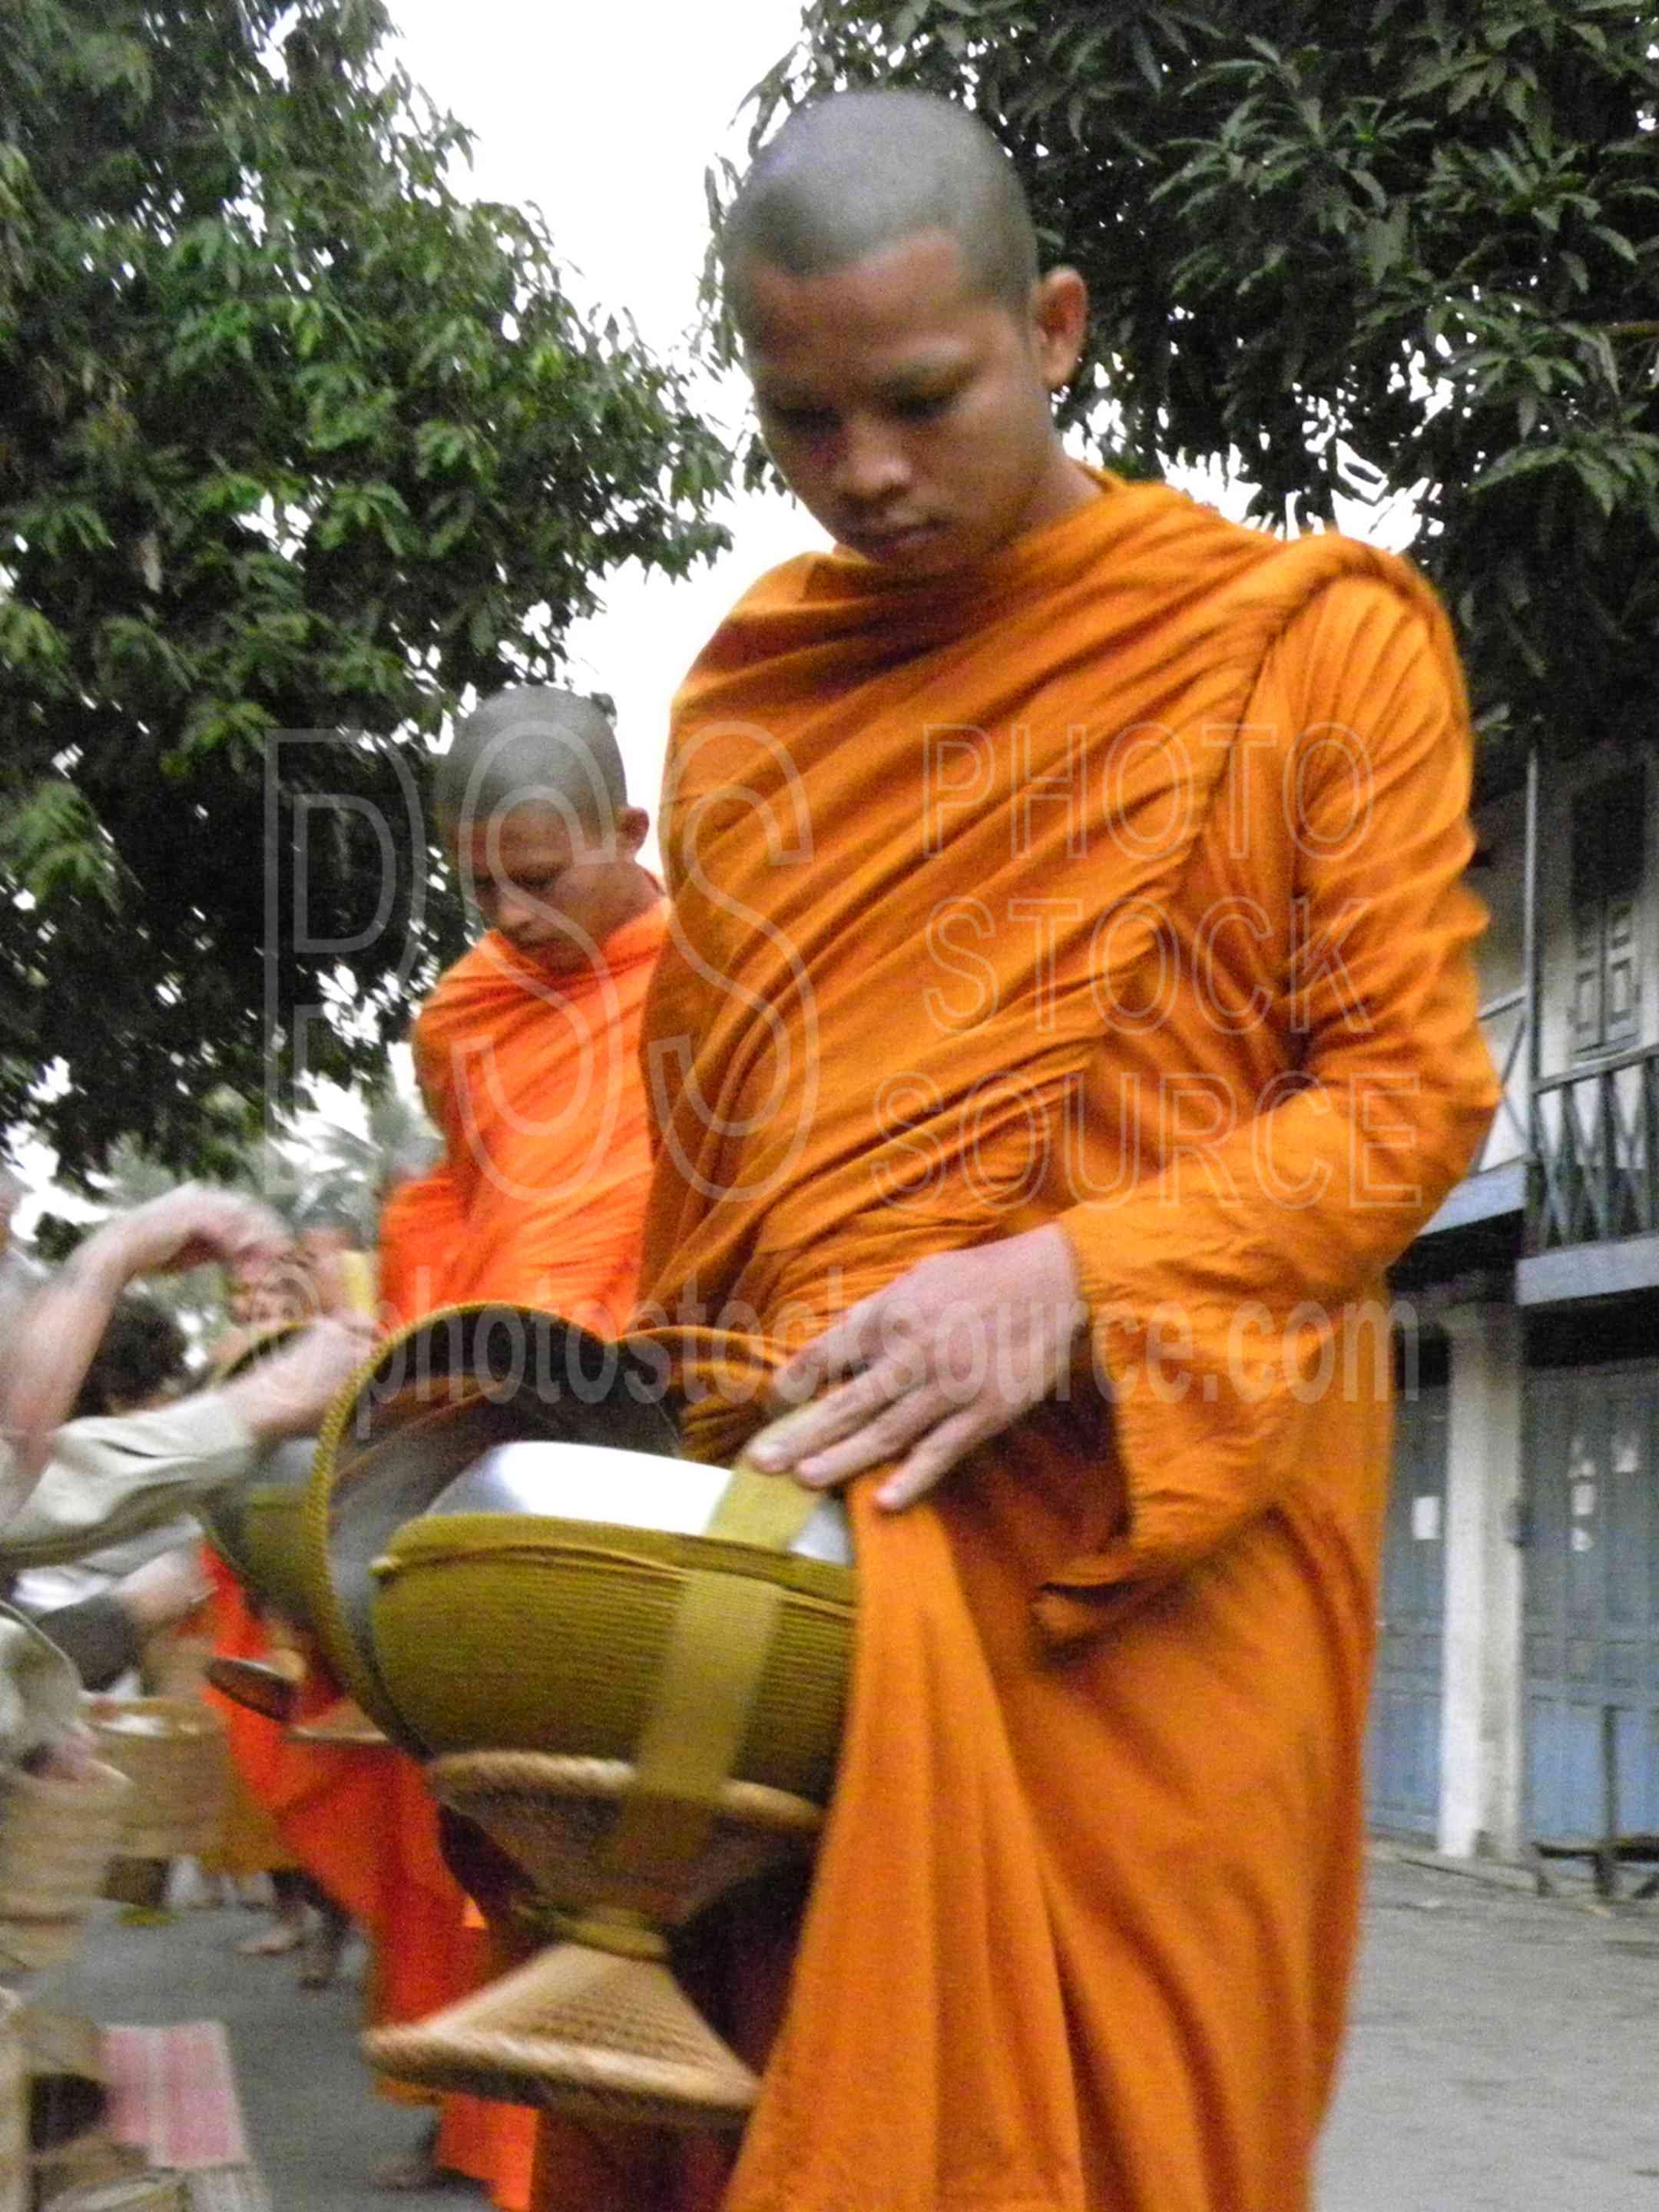 Alms Giving Ceremony,temple,buddhist,buddhism,religious,louang prabang,monks,food,breakfast